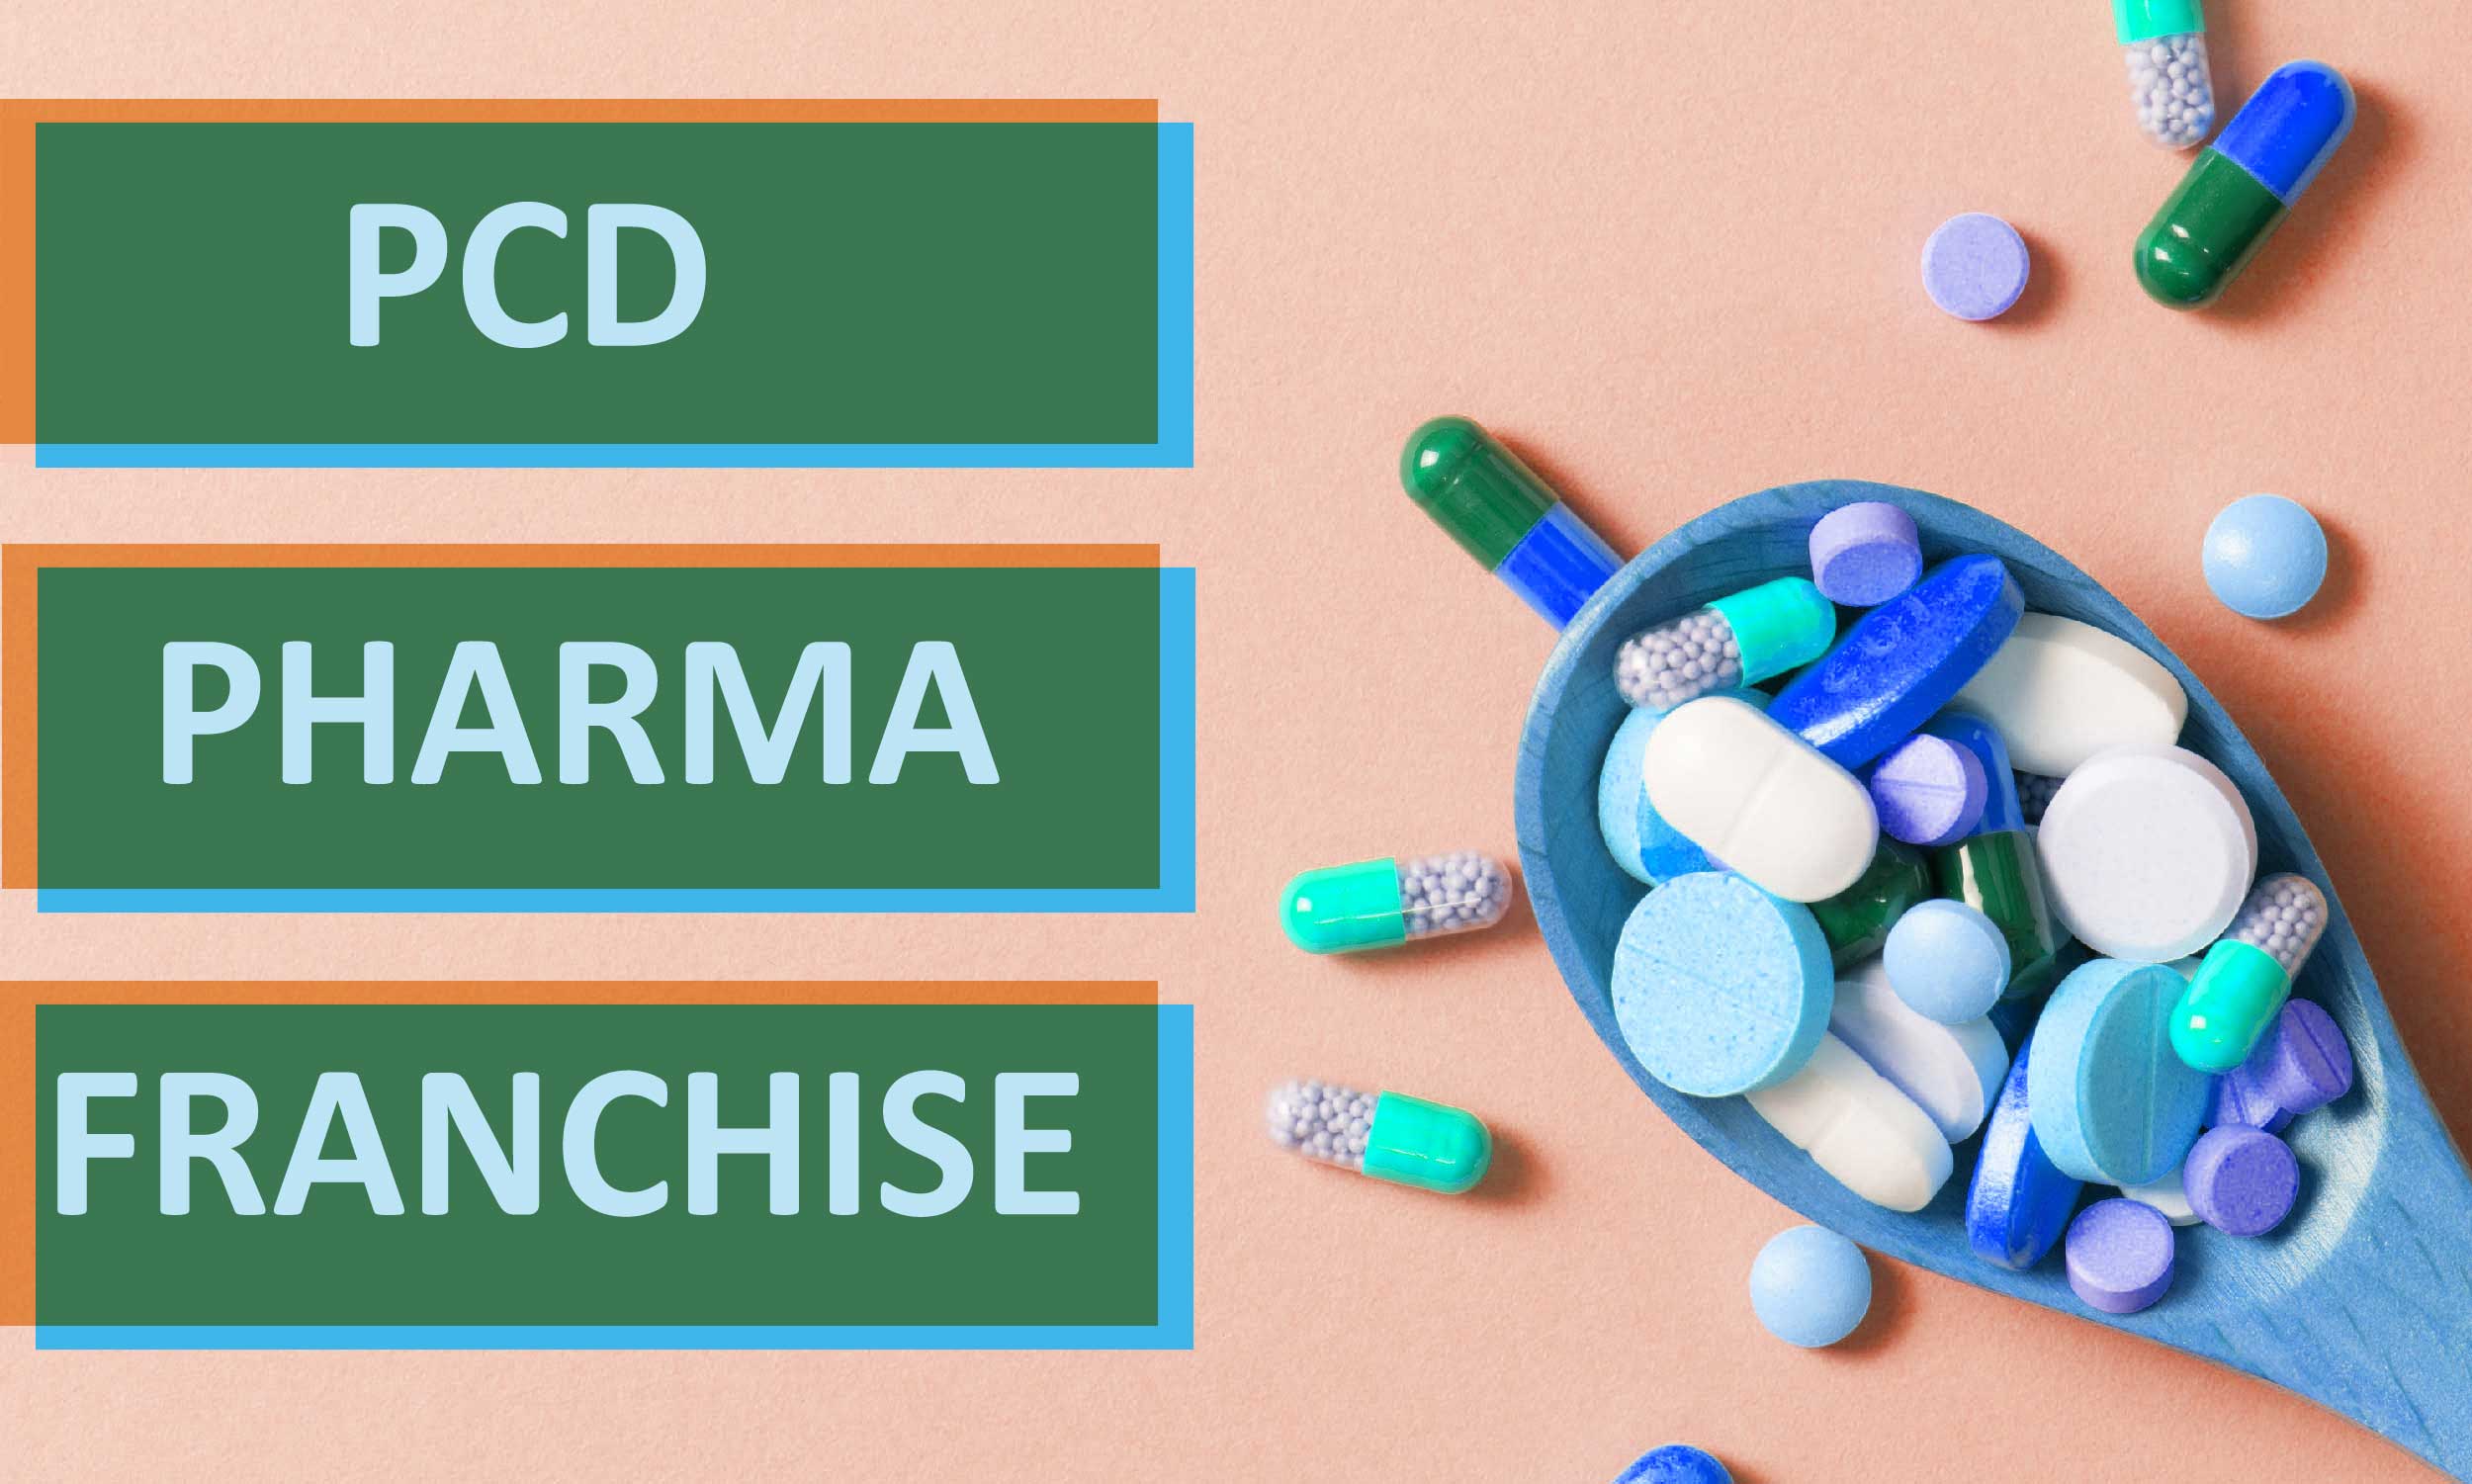 What Should be Considered Before Choosing Pharma Company for PCD Franchise?